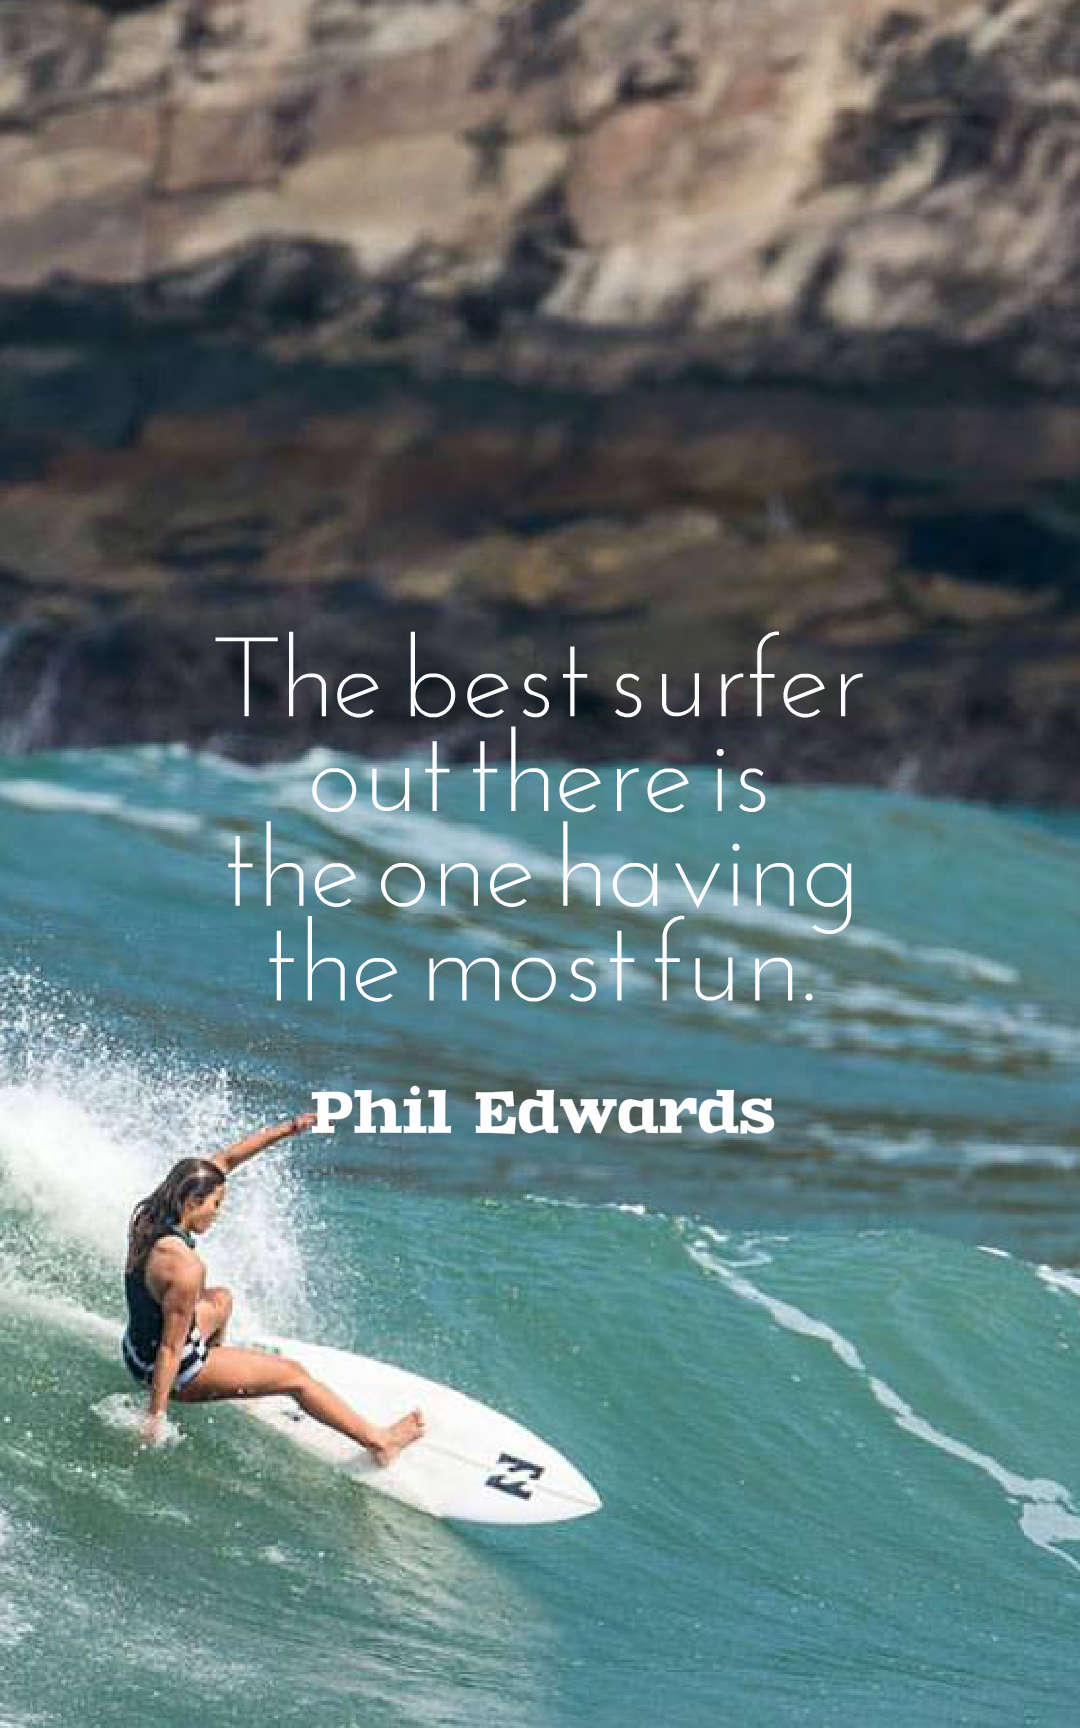 The best surfer out there is the one having the most fun.